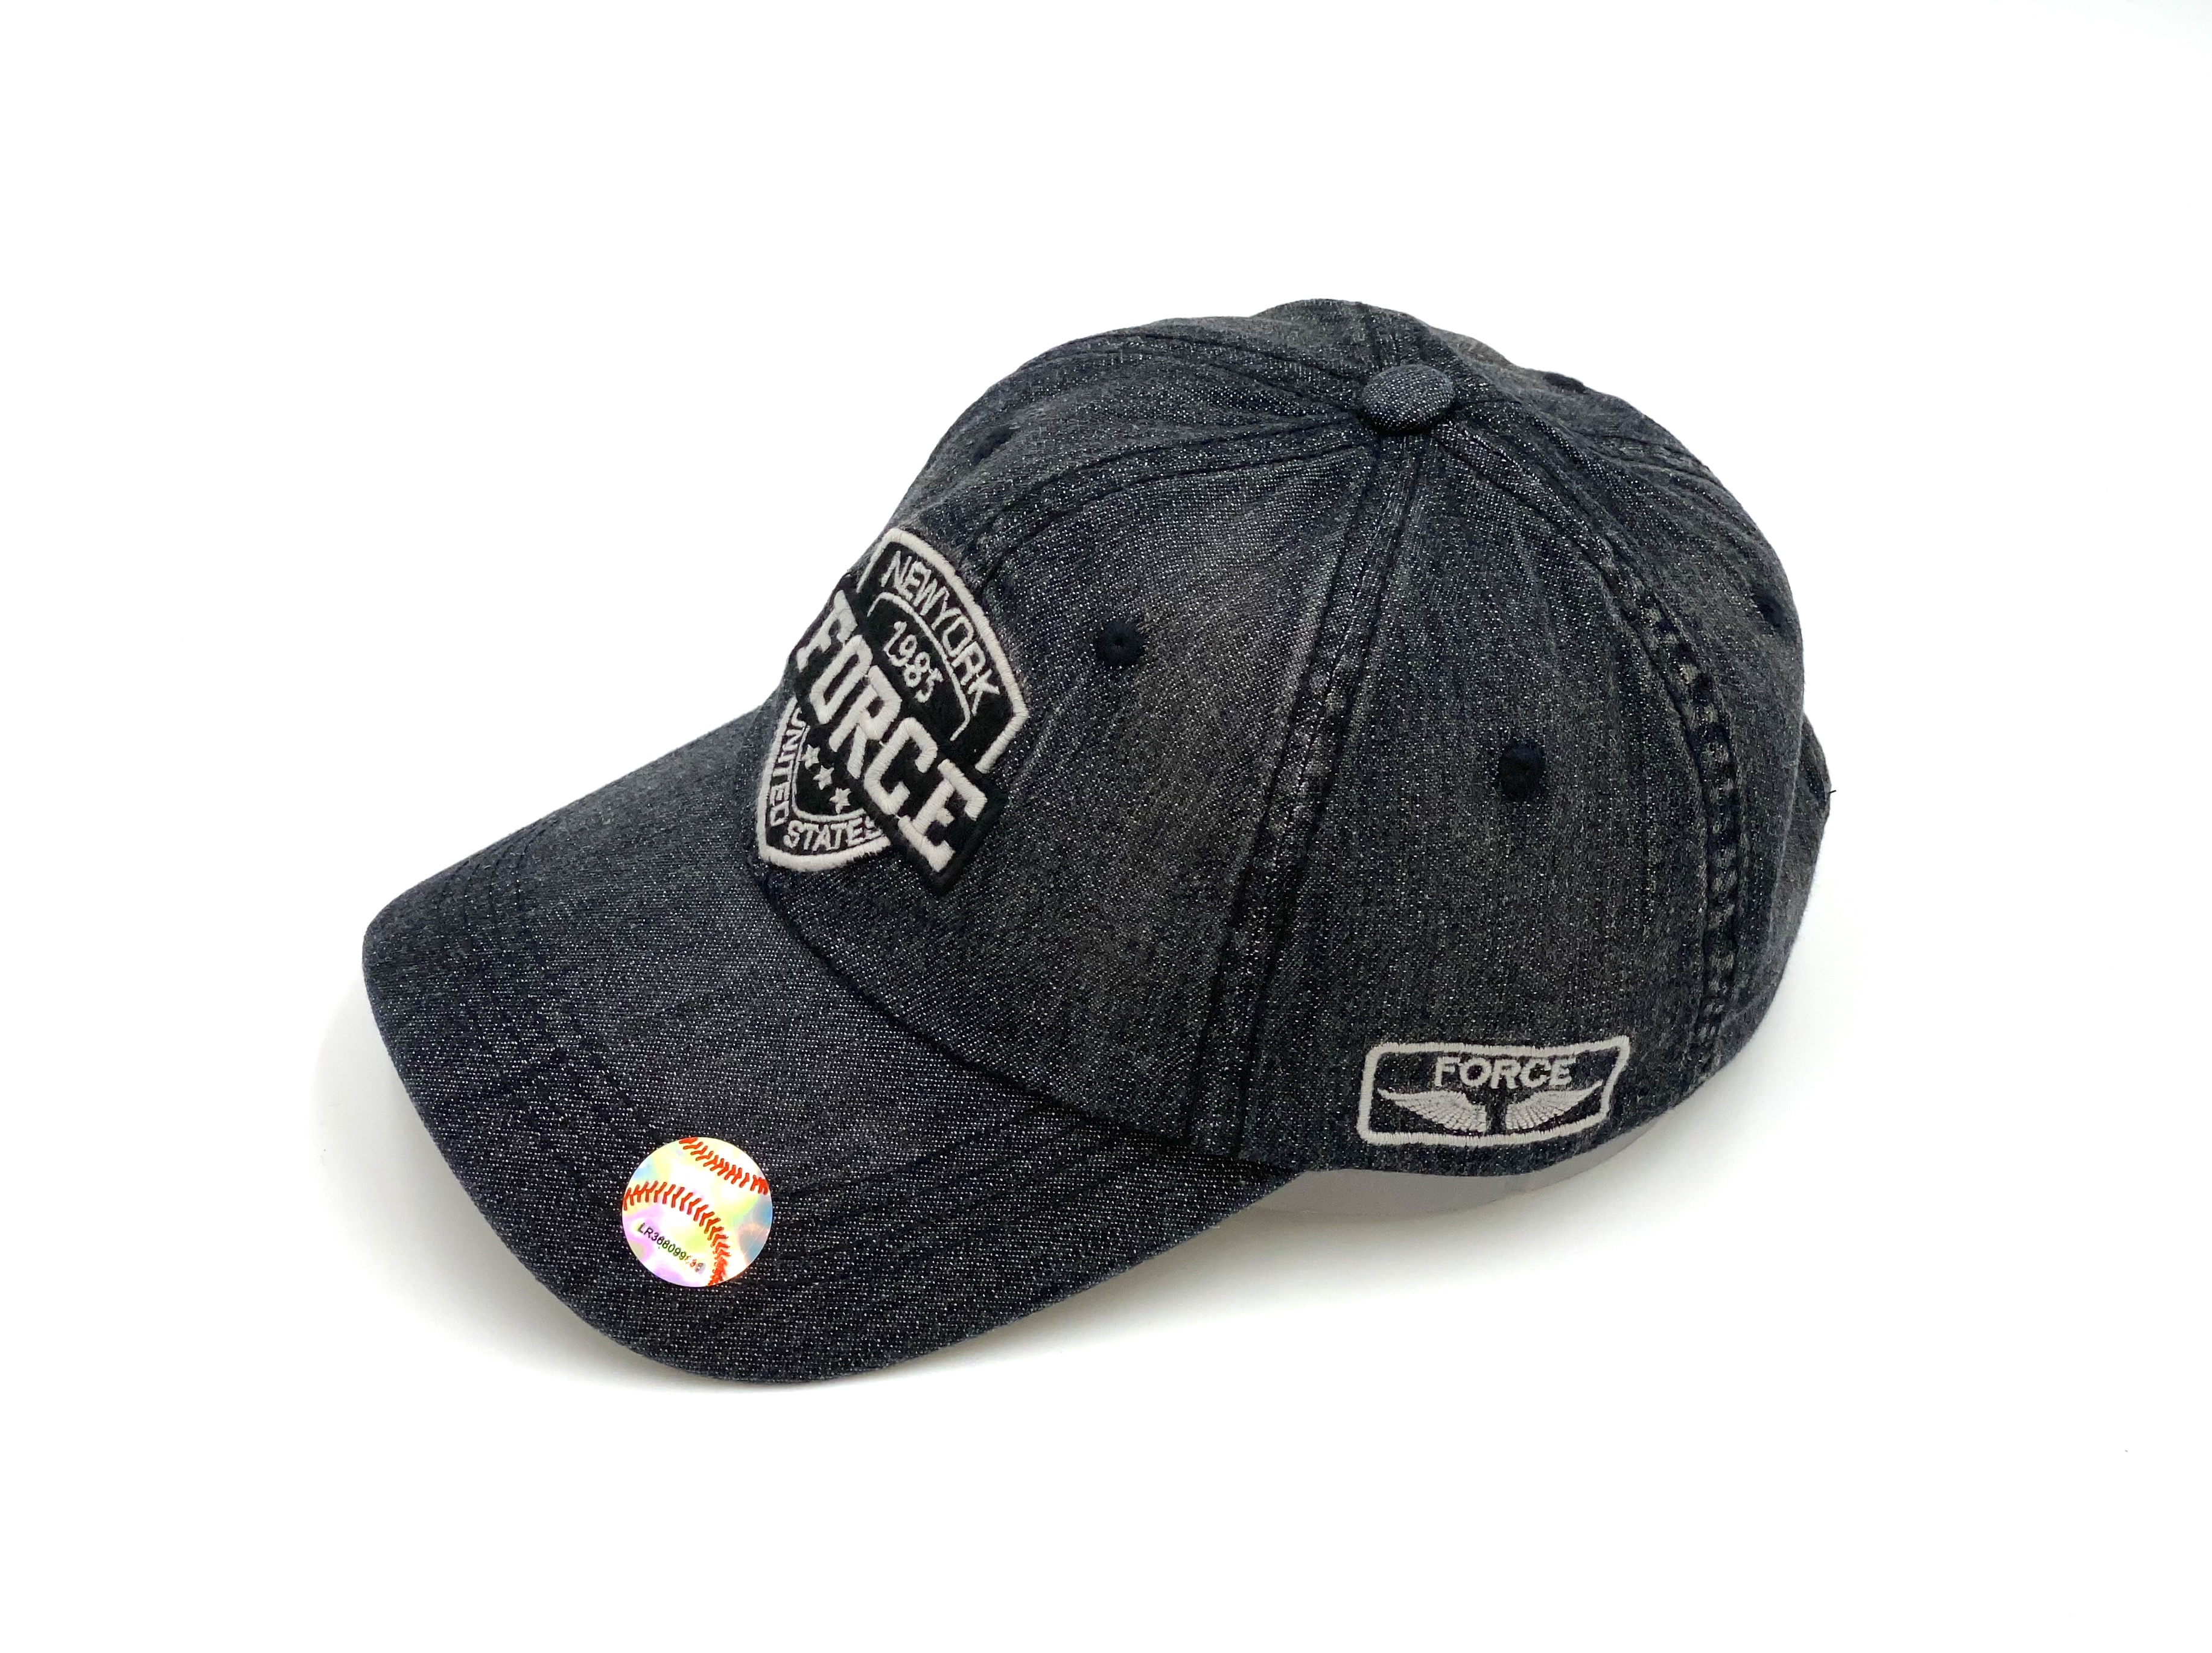 New York Force Jeans Cap